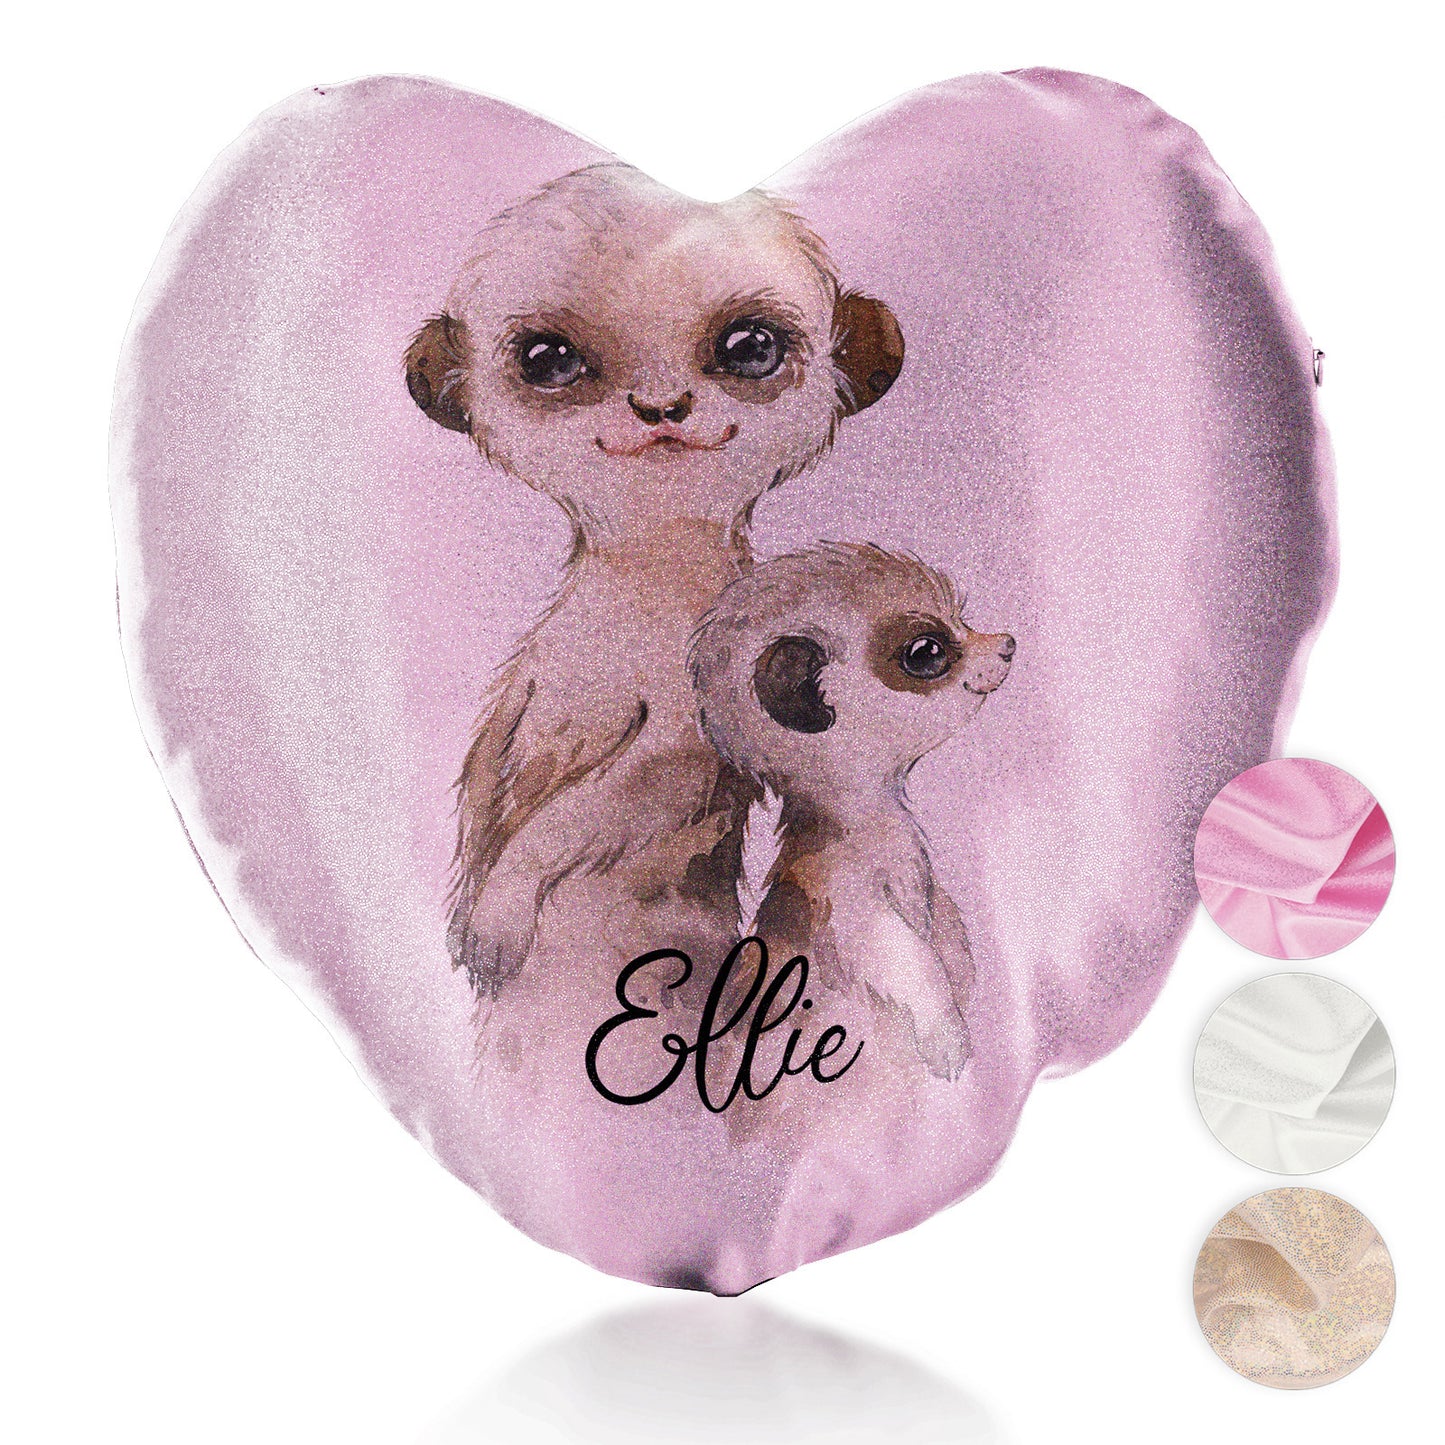 Personalised Glitter Heart Cushion with Meerkat Baby and Adult and Cute Text